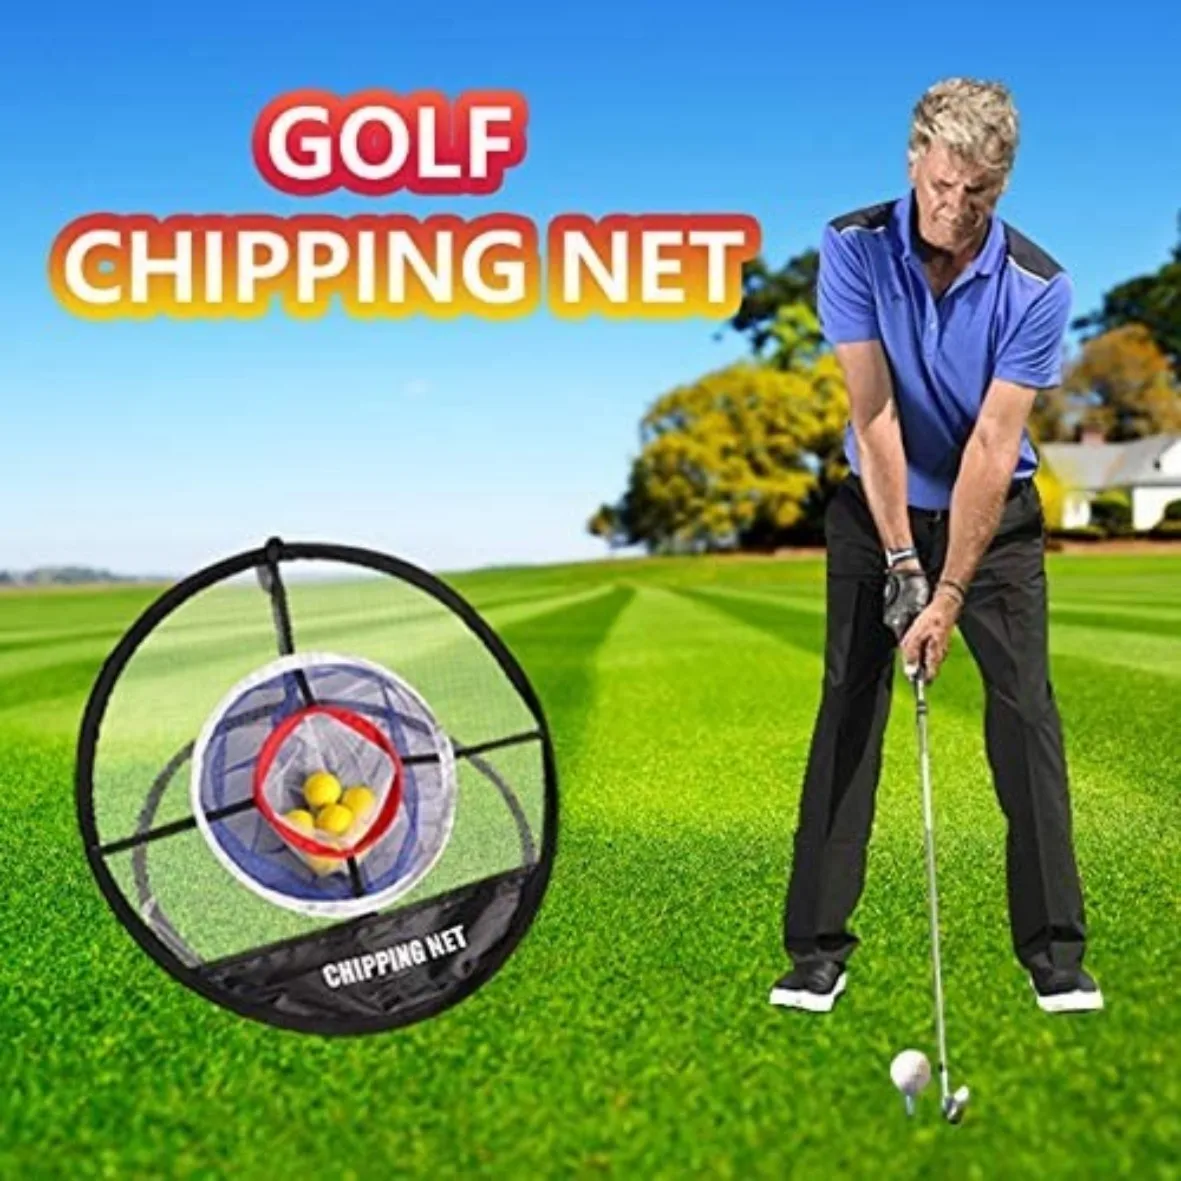 Portable Adult Children Golf Training Hitting Net Indoor Outdoor Chipping Pitching Pop Up Cages Easy Practice Aids Mats Golf Net boblov golf practice net golf chipping net swing trainer pop up indoor outdoor chipping pitching cages mats portable